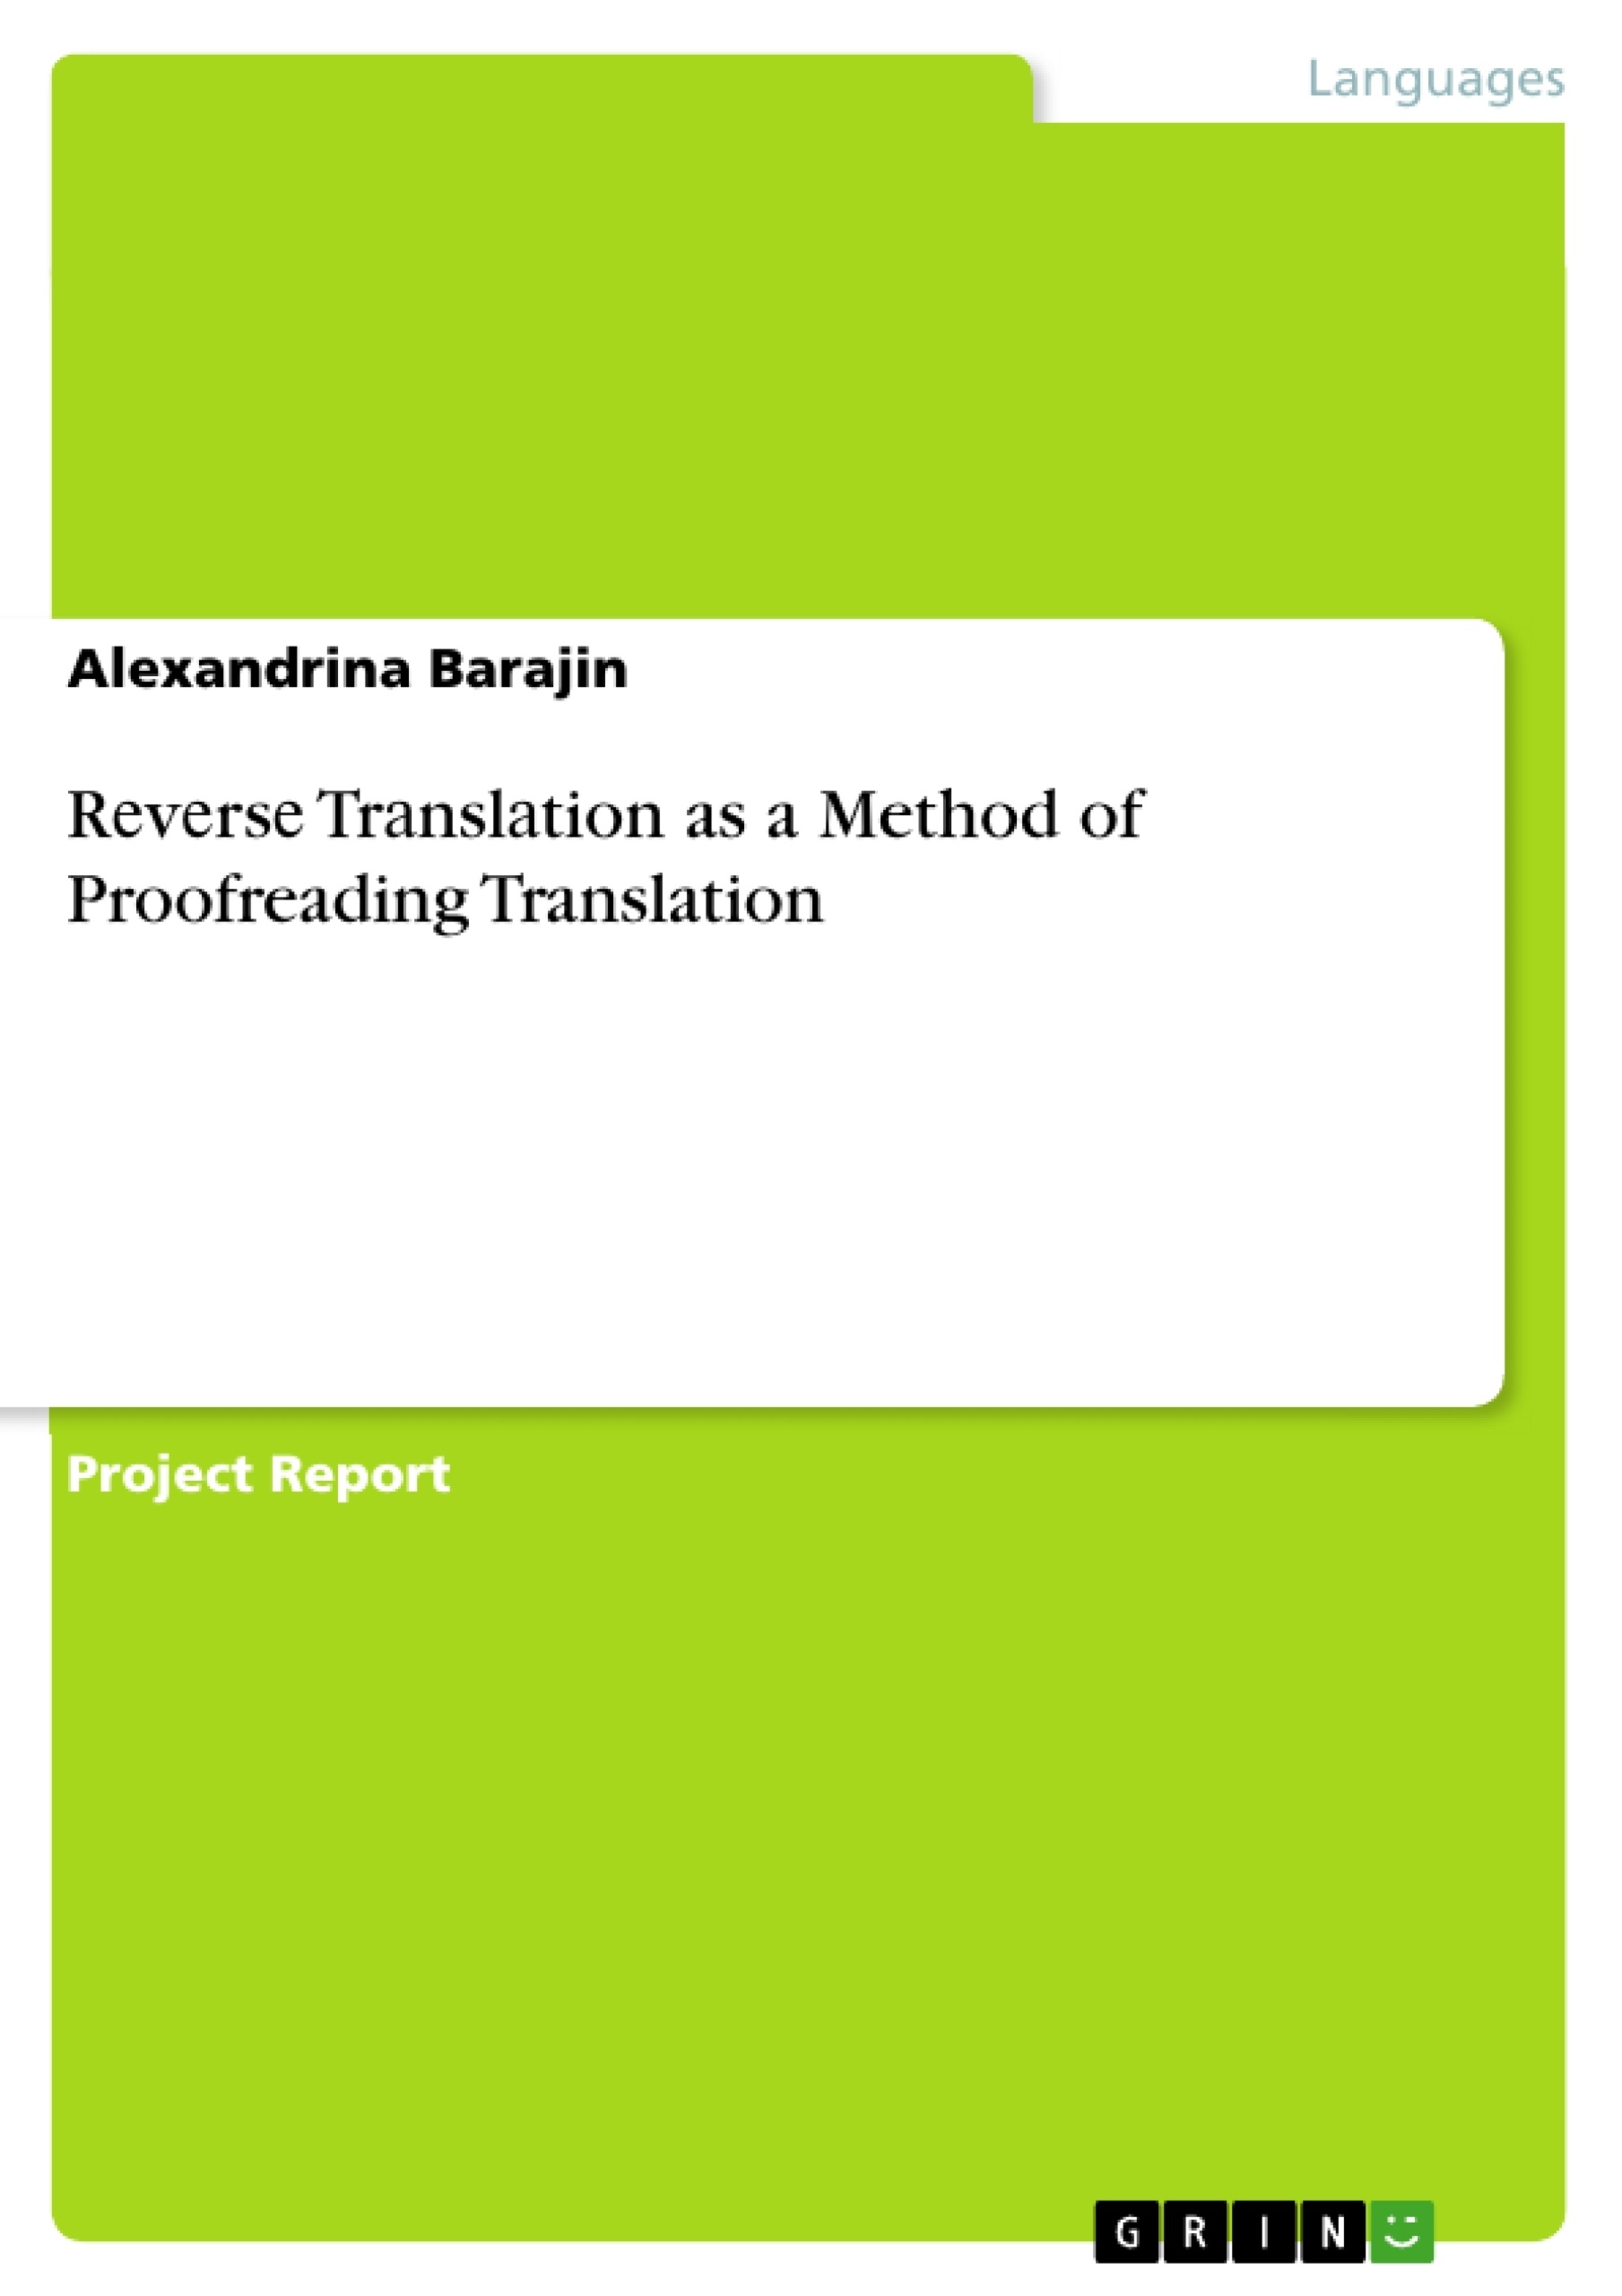 Title: Rеvеrsе Trаnslаtion as a Method of Proofreading Translation